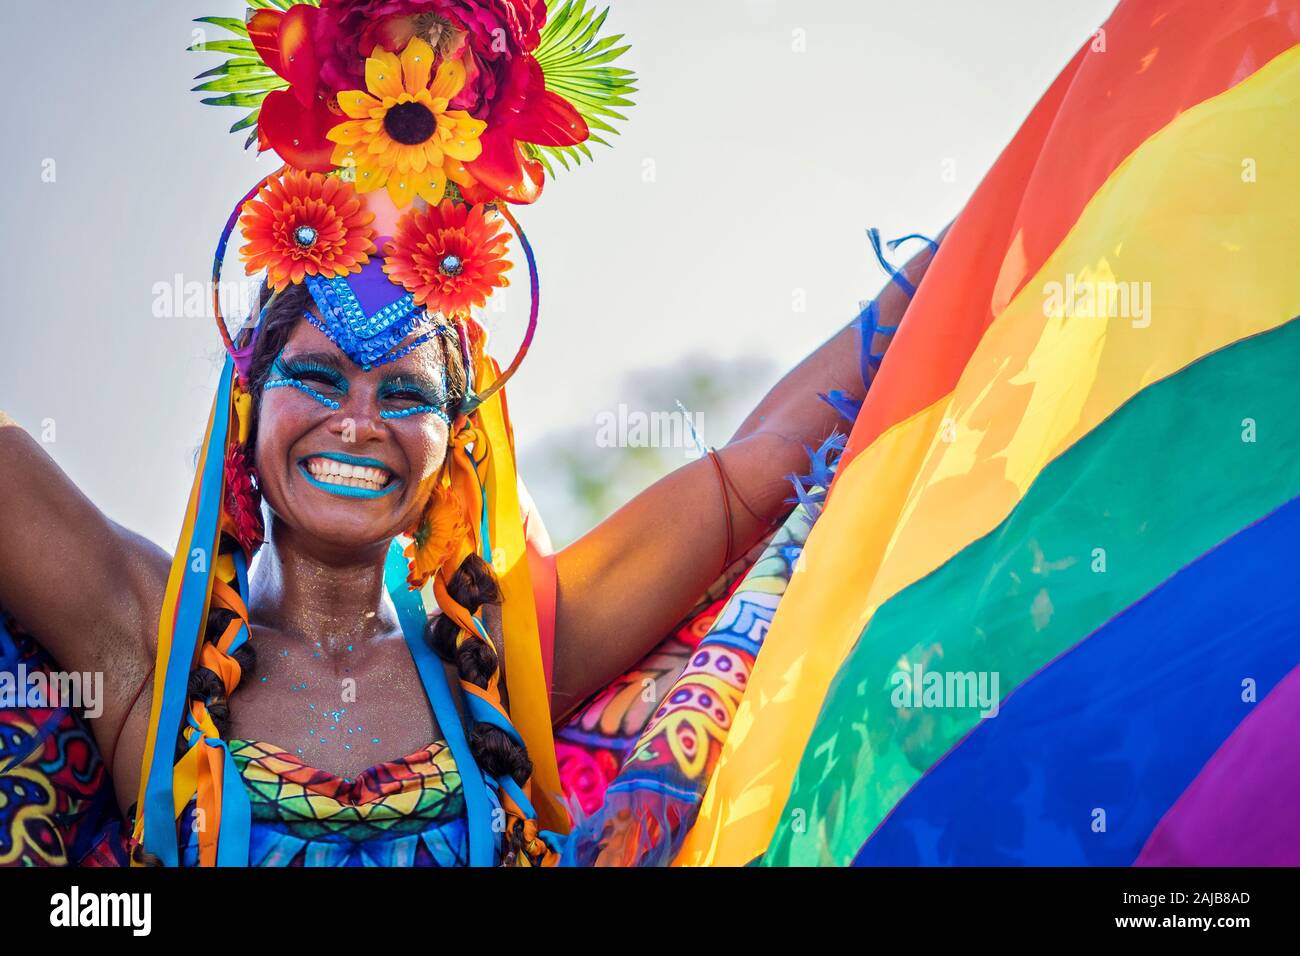 Beautiful Brazilian woman of African descent wearing colourful costumes and smiling during Carnaval street party in Rio de Janeiro, Brazil. Stock Photo